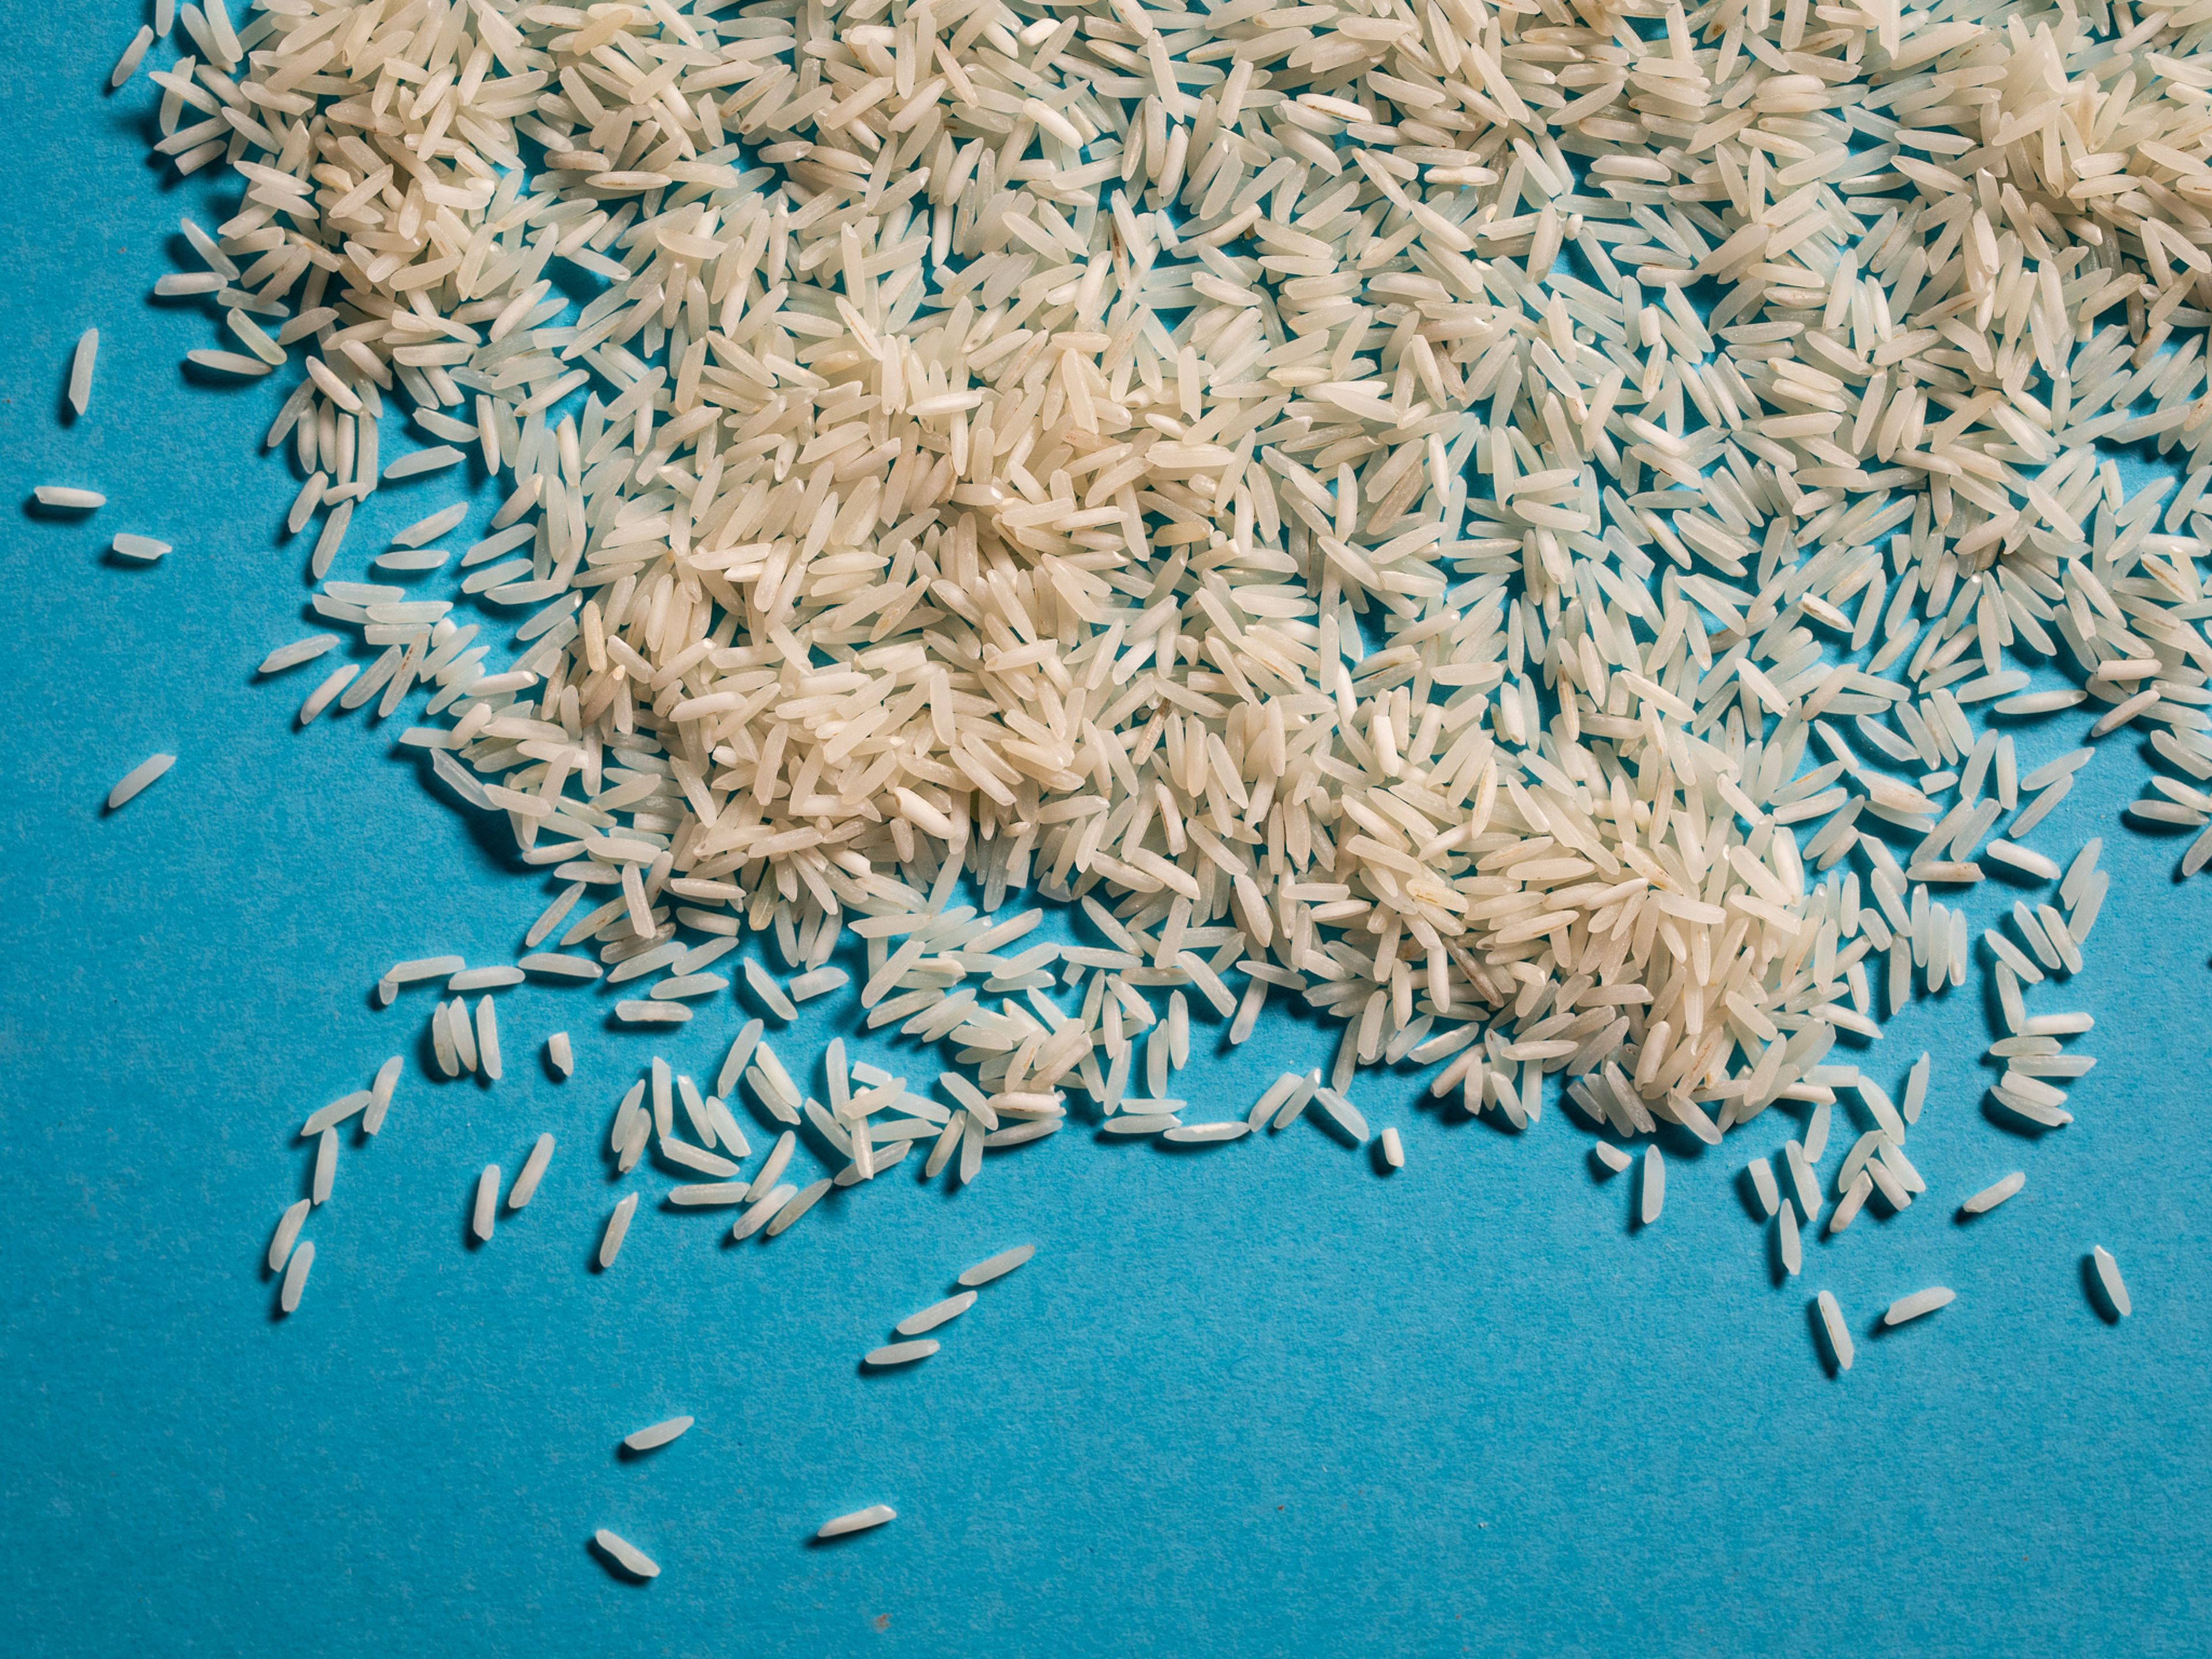 informative essay about how to cook rice